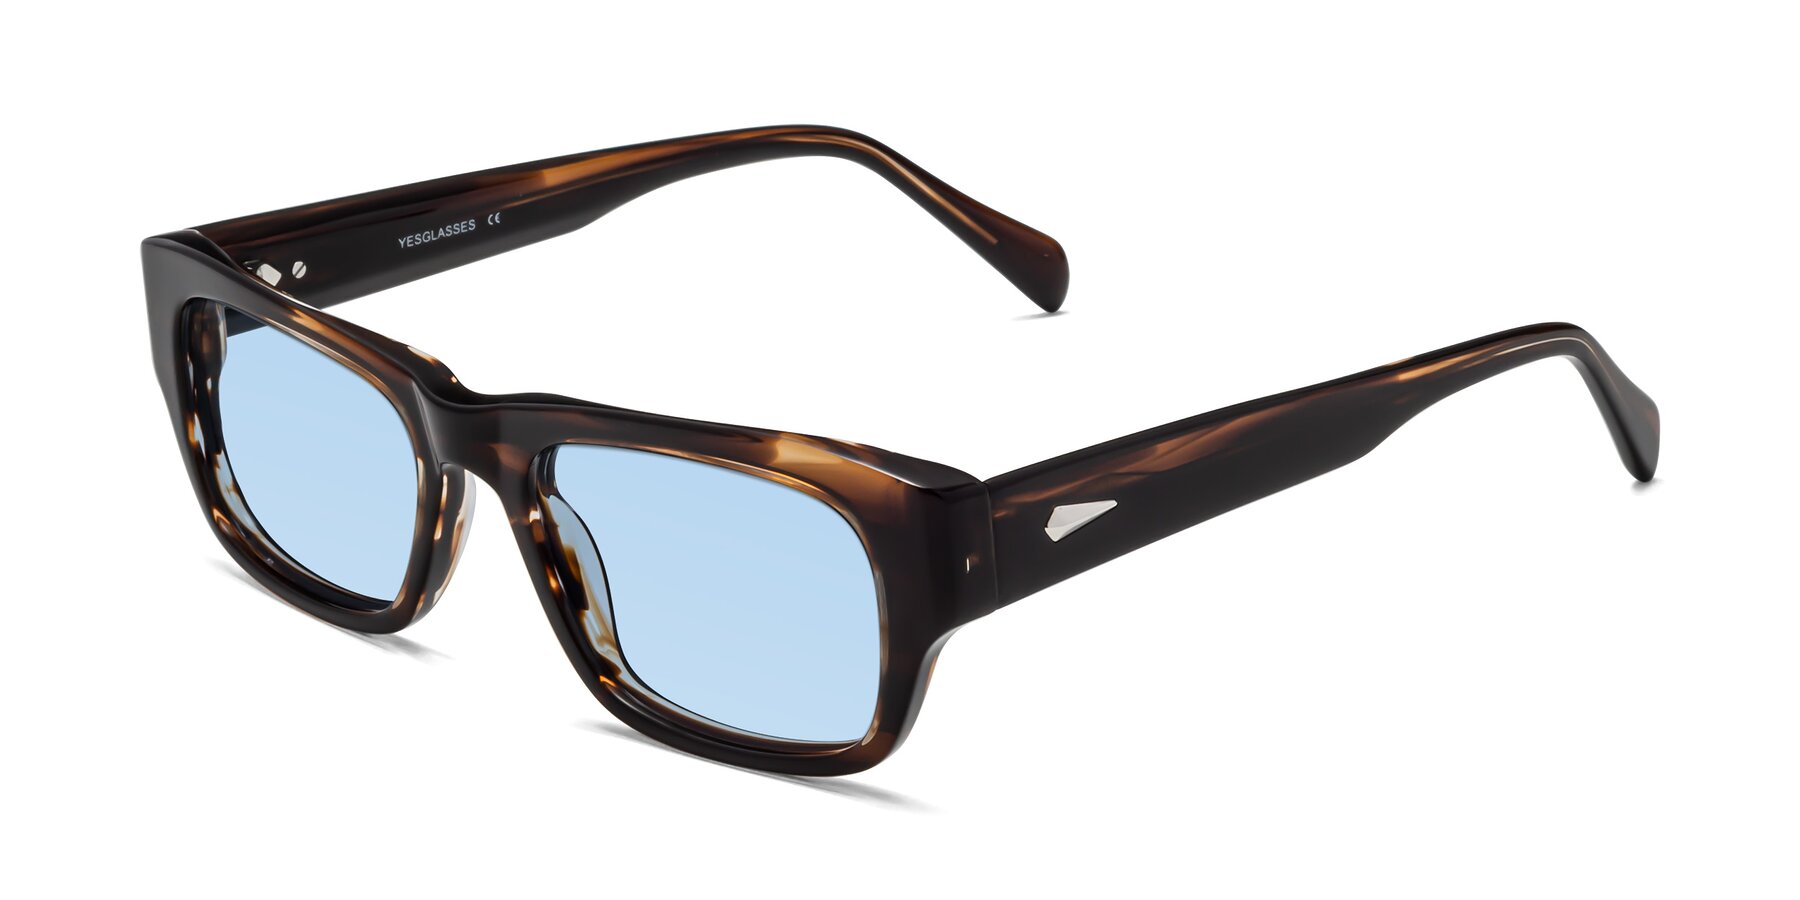 Angle of 1537 in Stripe Brown with Light Blue Tinted Lenses